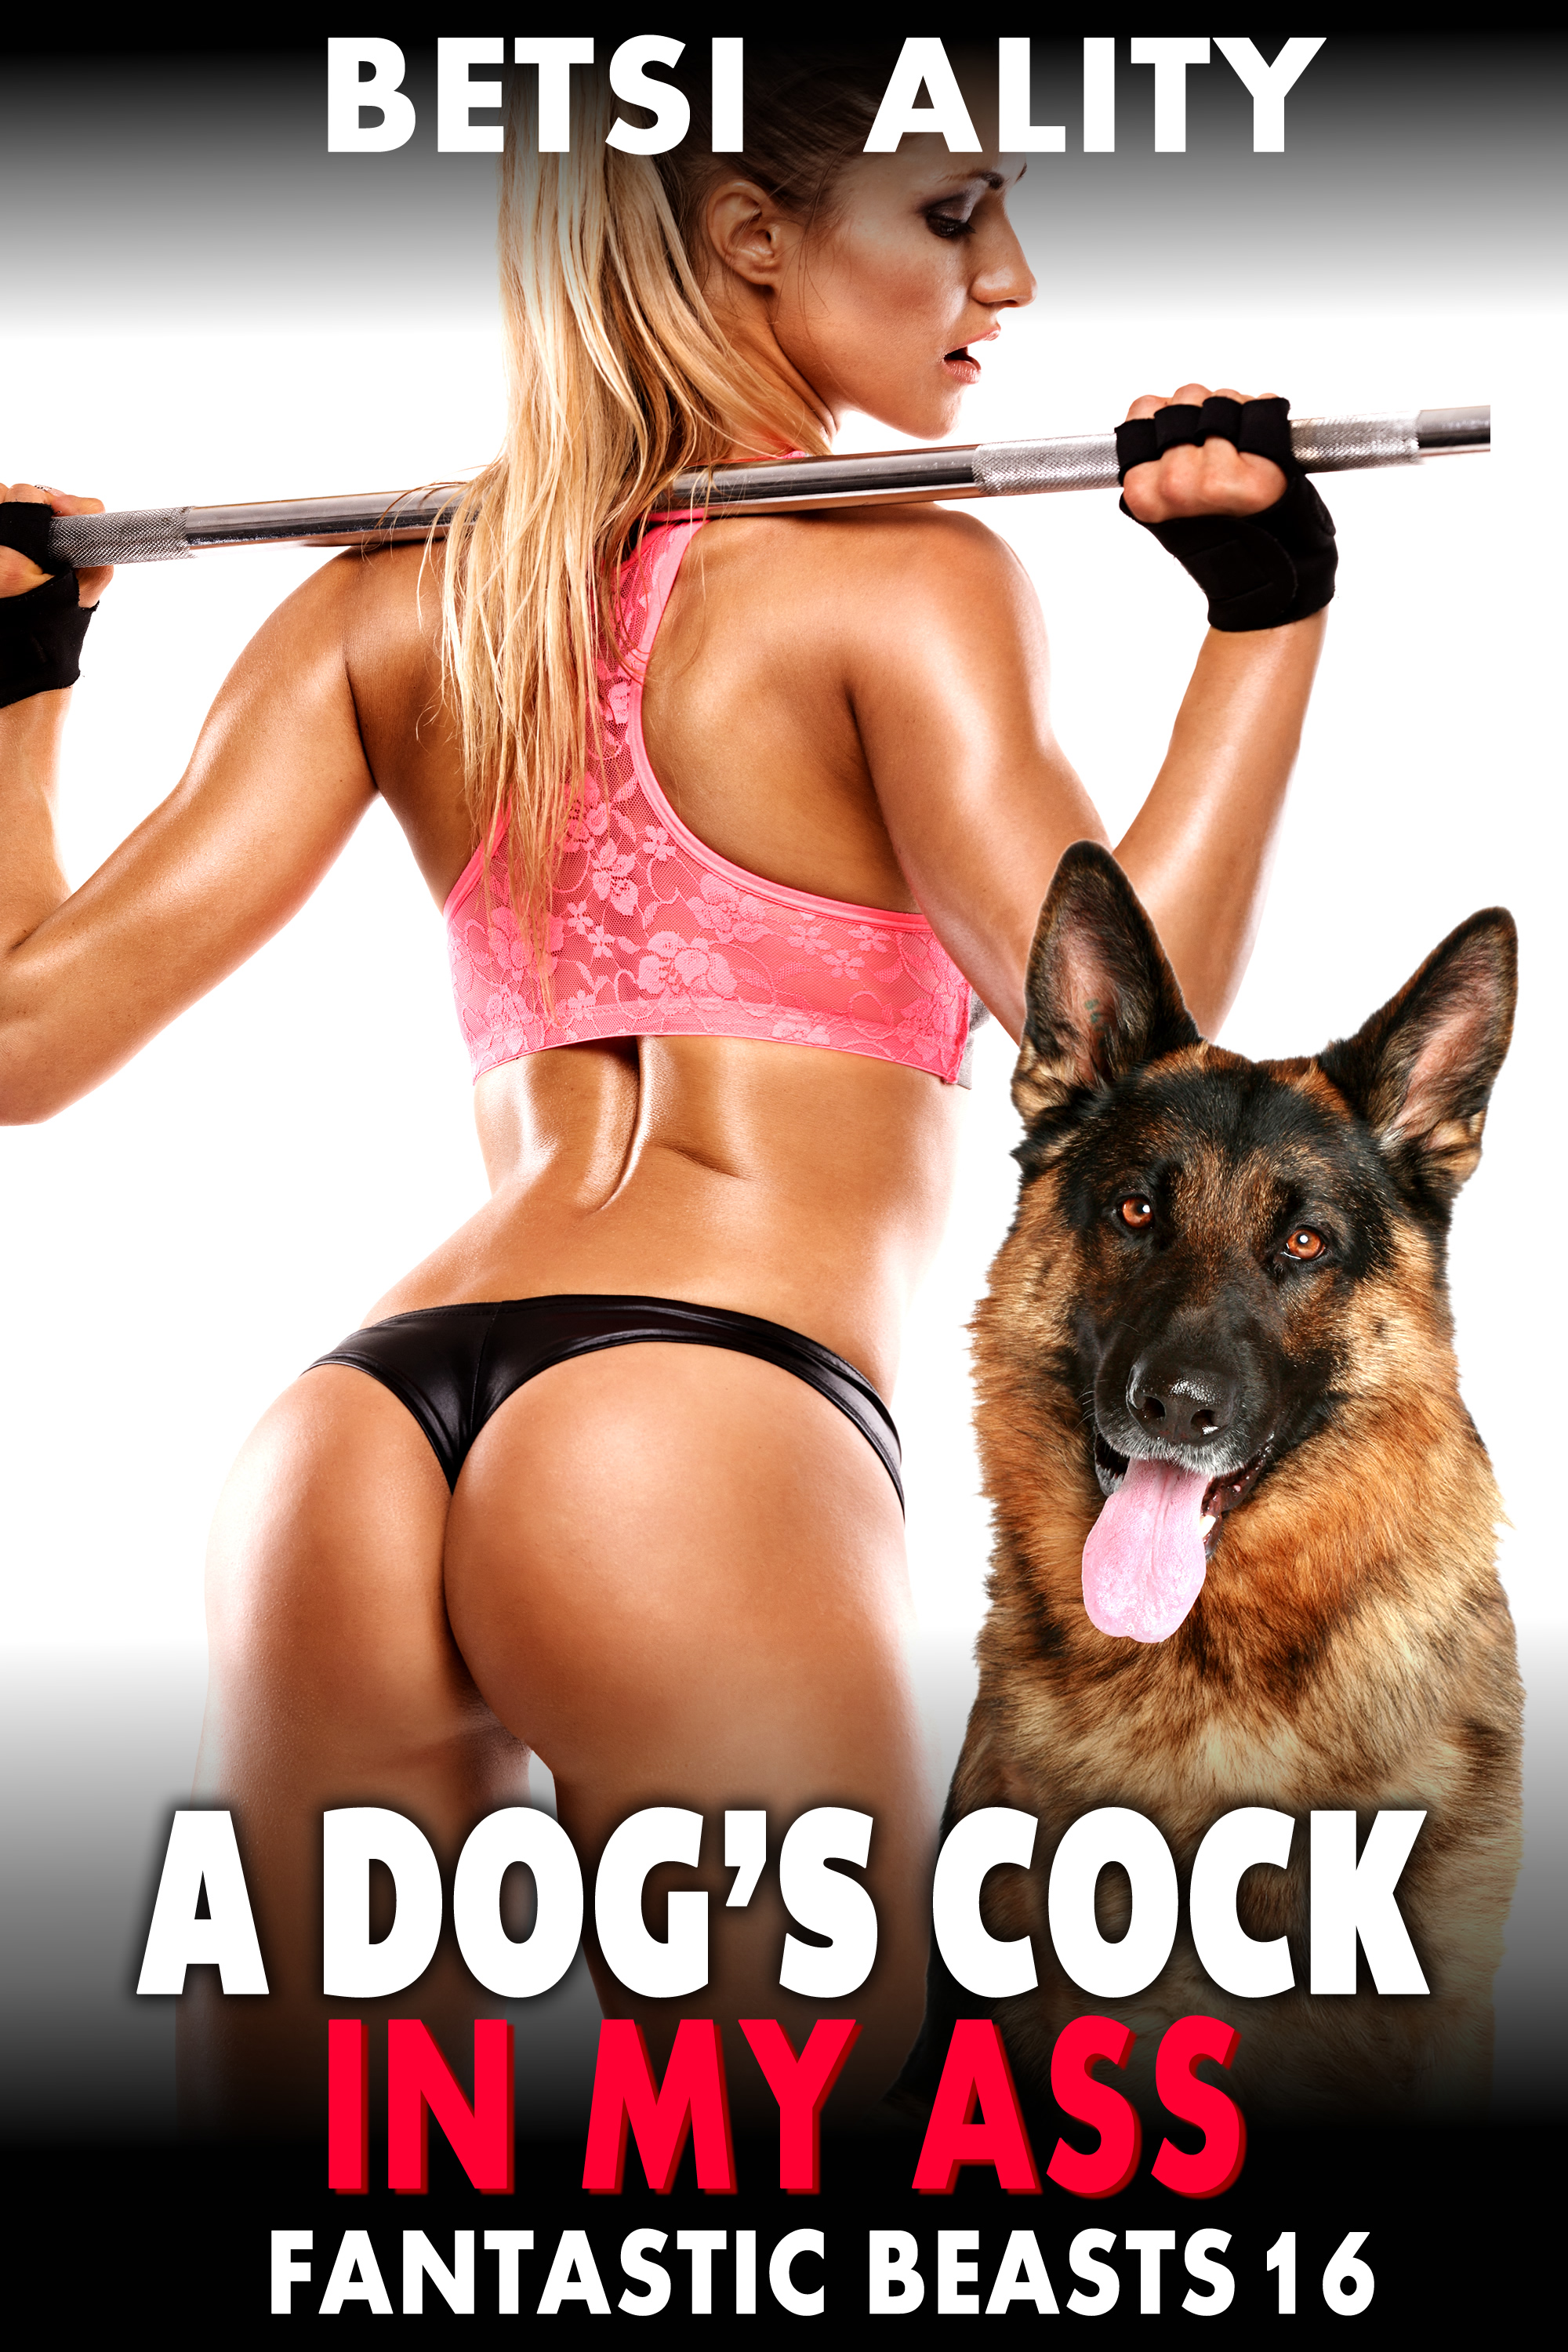 A Dog’s Cock in My Ass : Fantastic Beasts 16, an Ebook by Betsi Ality.